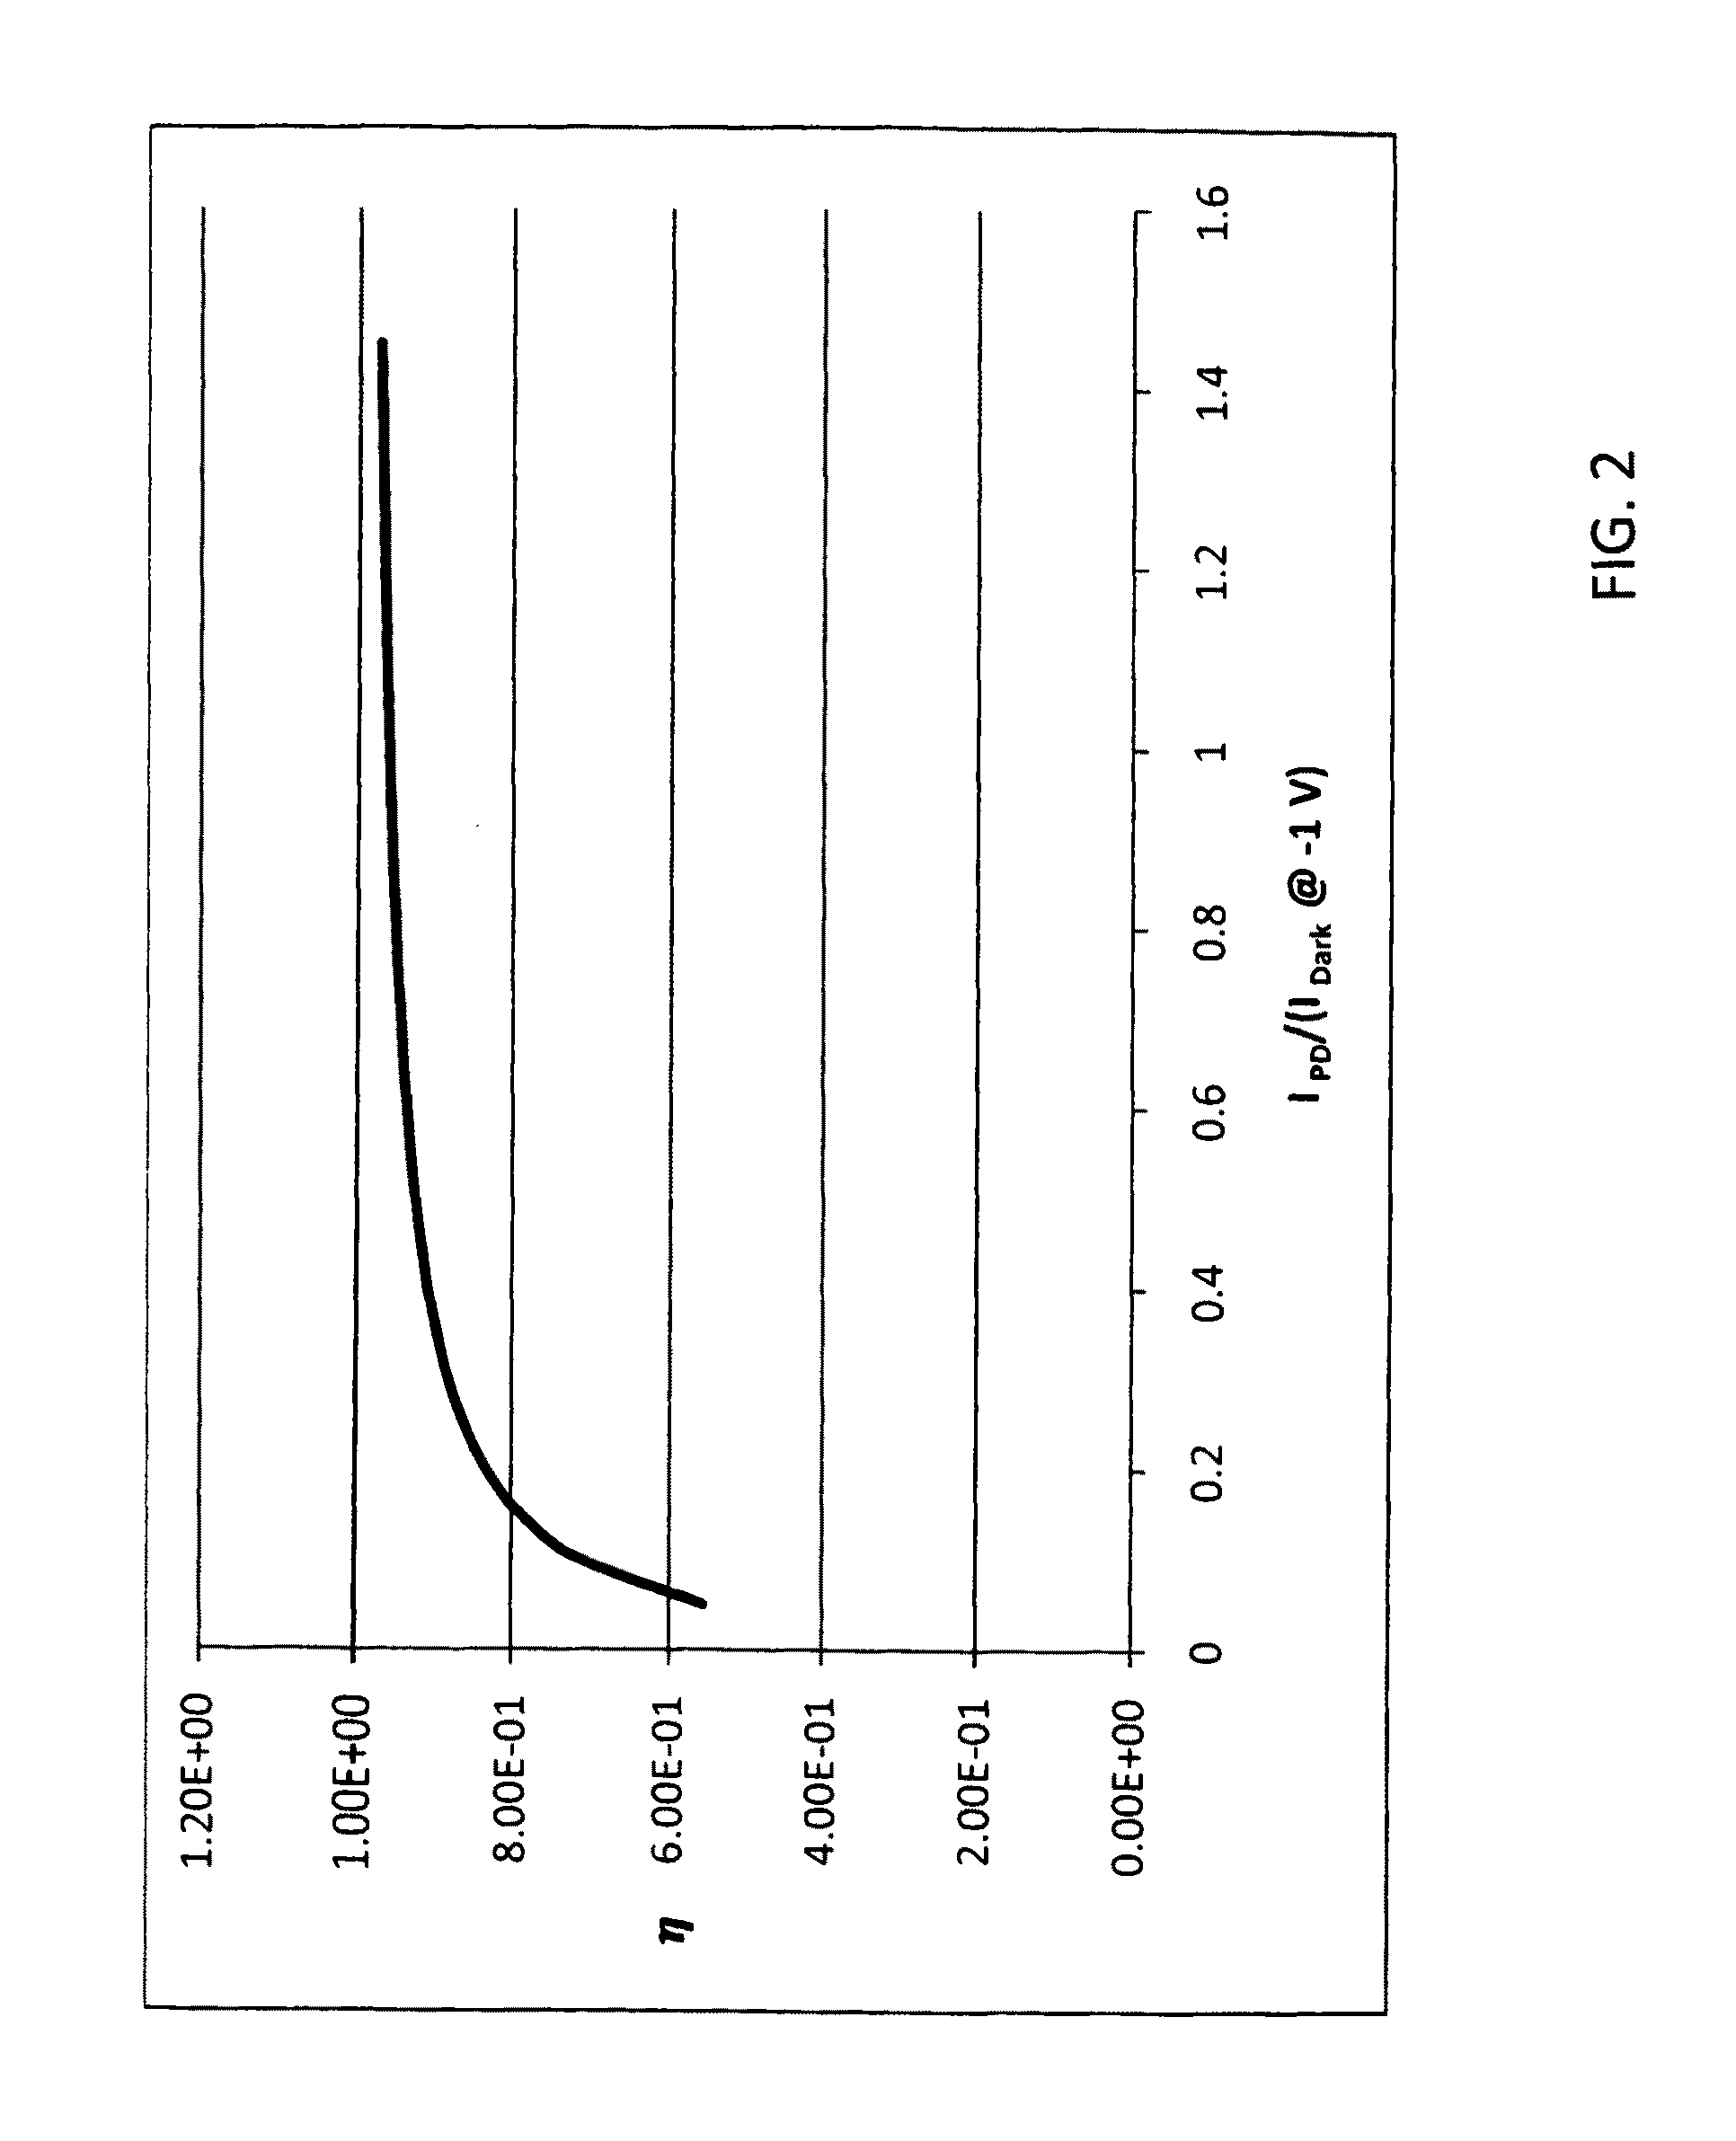 Snapshot pixel circuit for minimizing leakage current in an imaging sensor having a two-pole integration switch